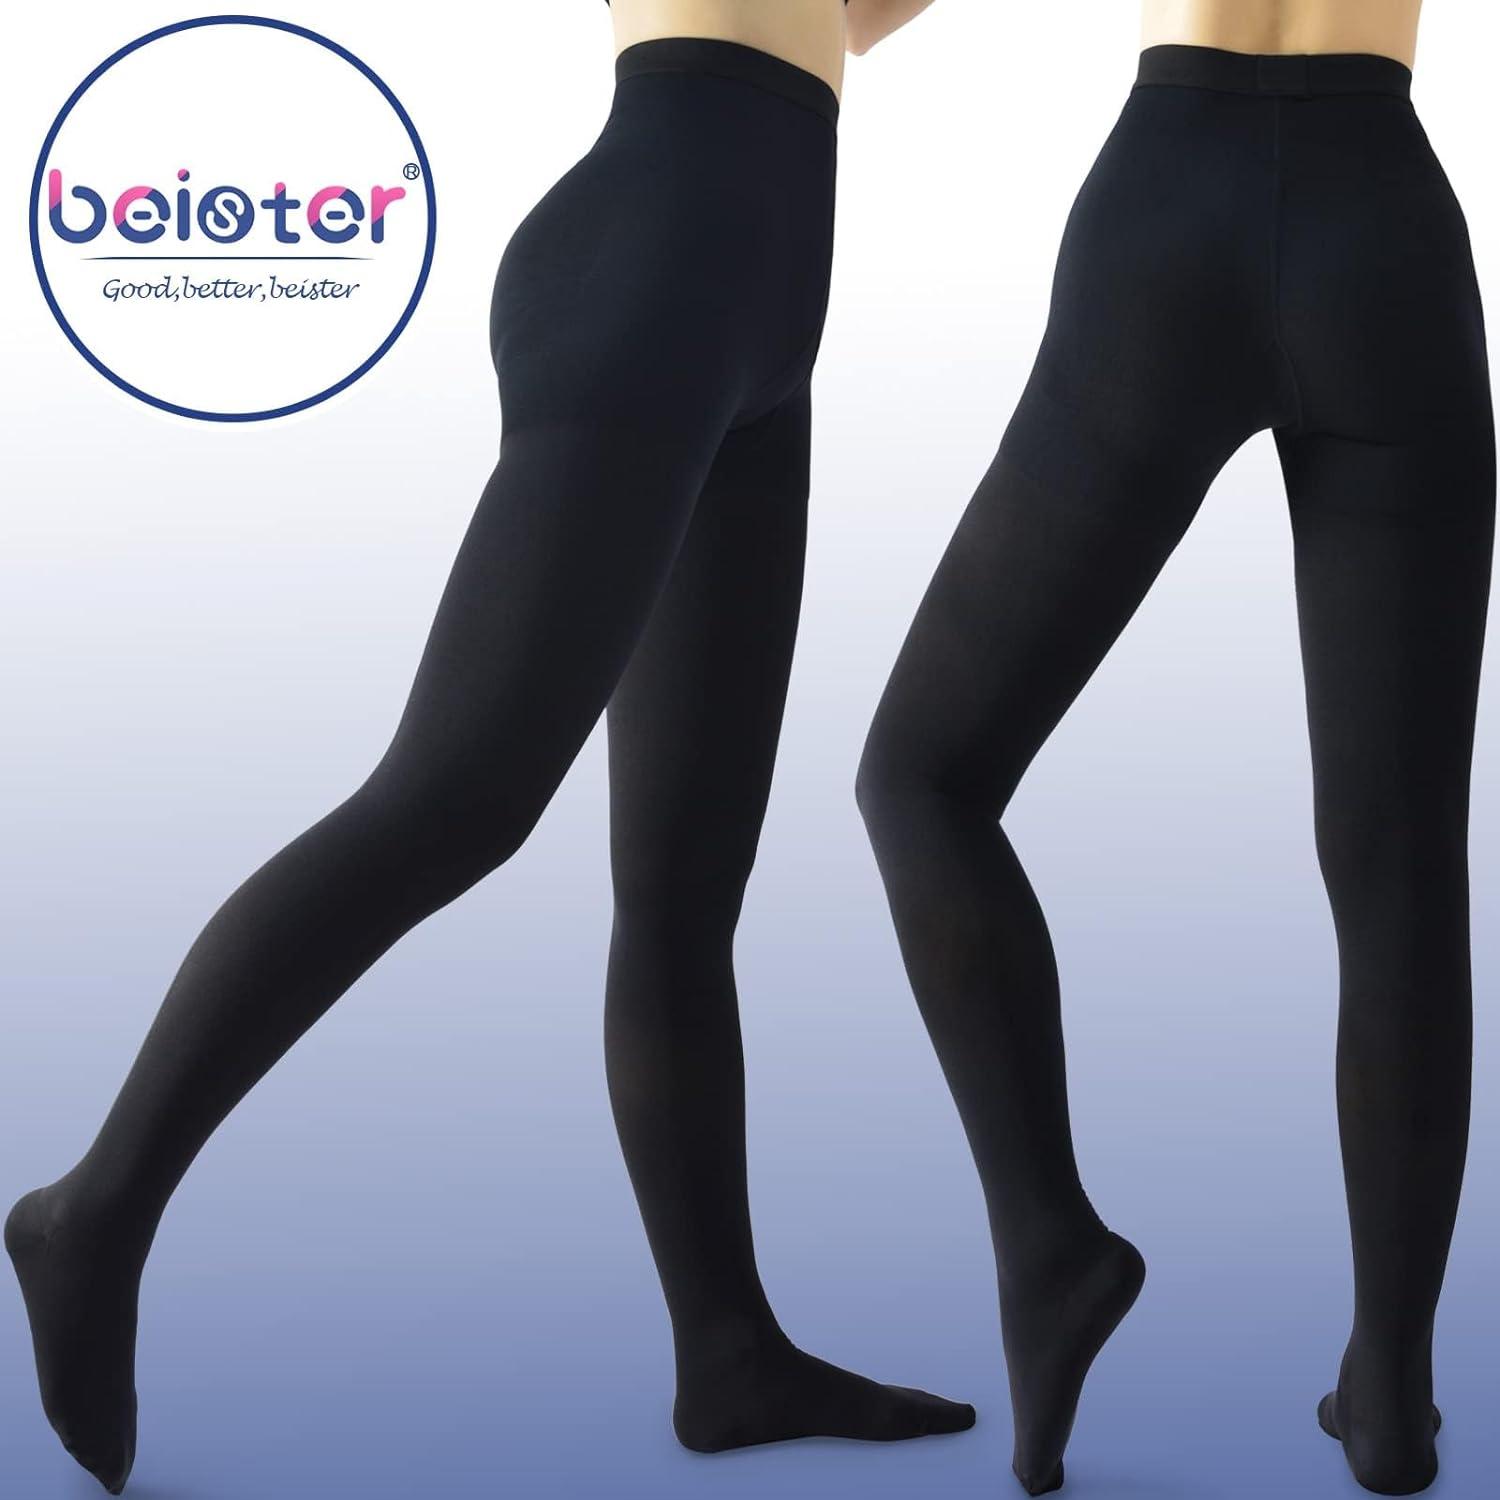 beister Medical Compression Pantyhose for Women & Men Opaque